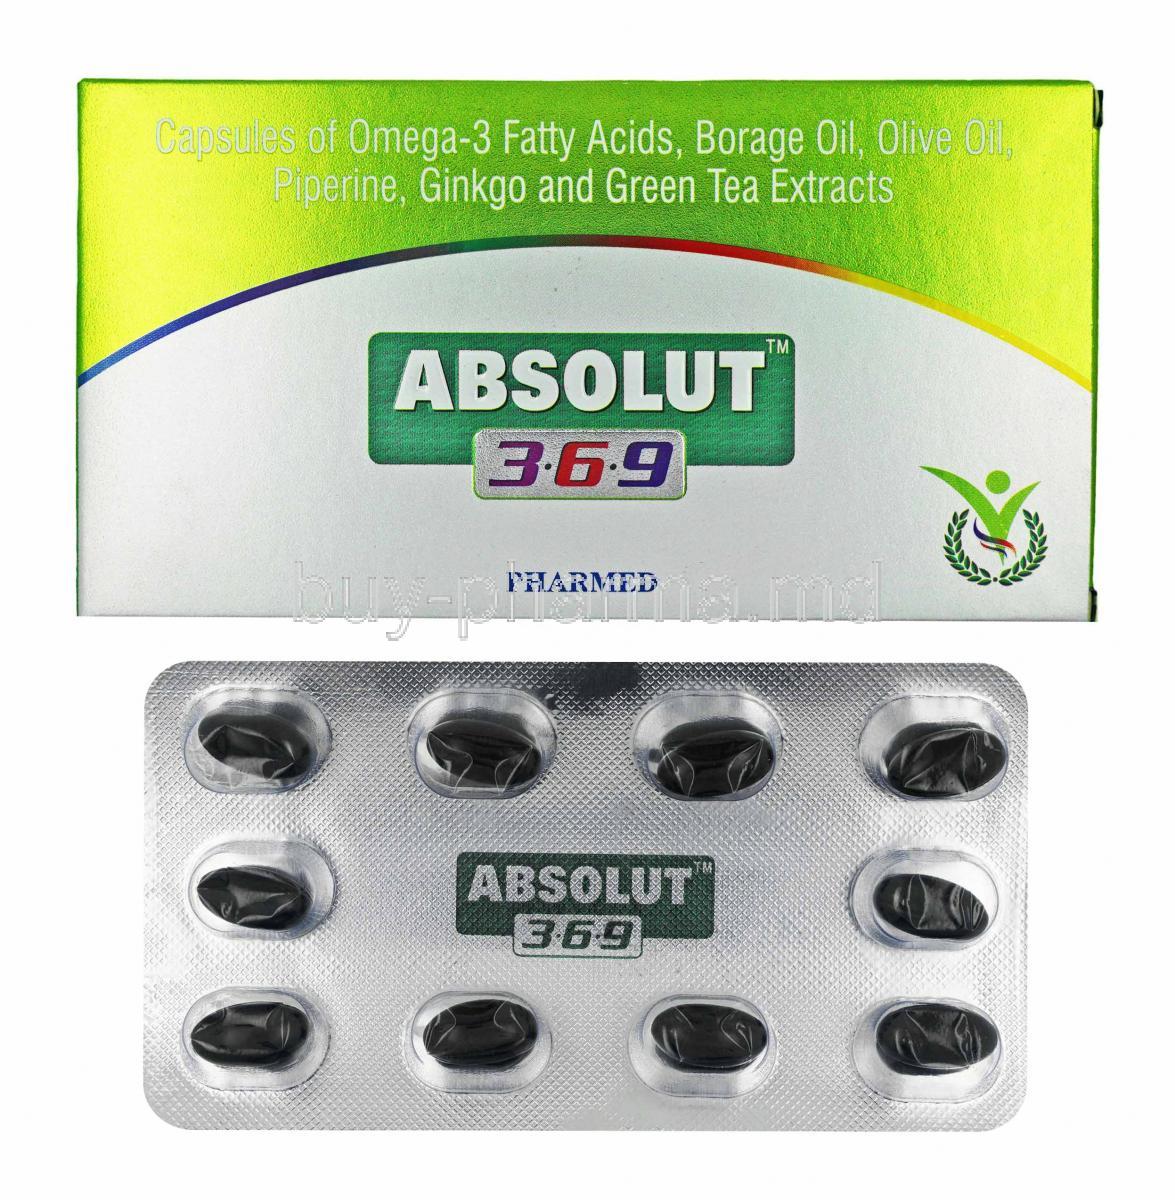 Absolut 3.6.9 box and capsules